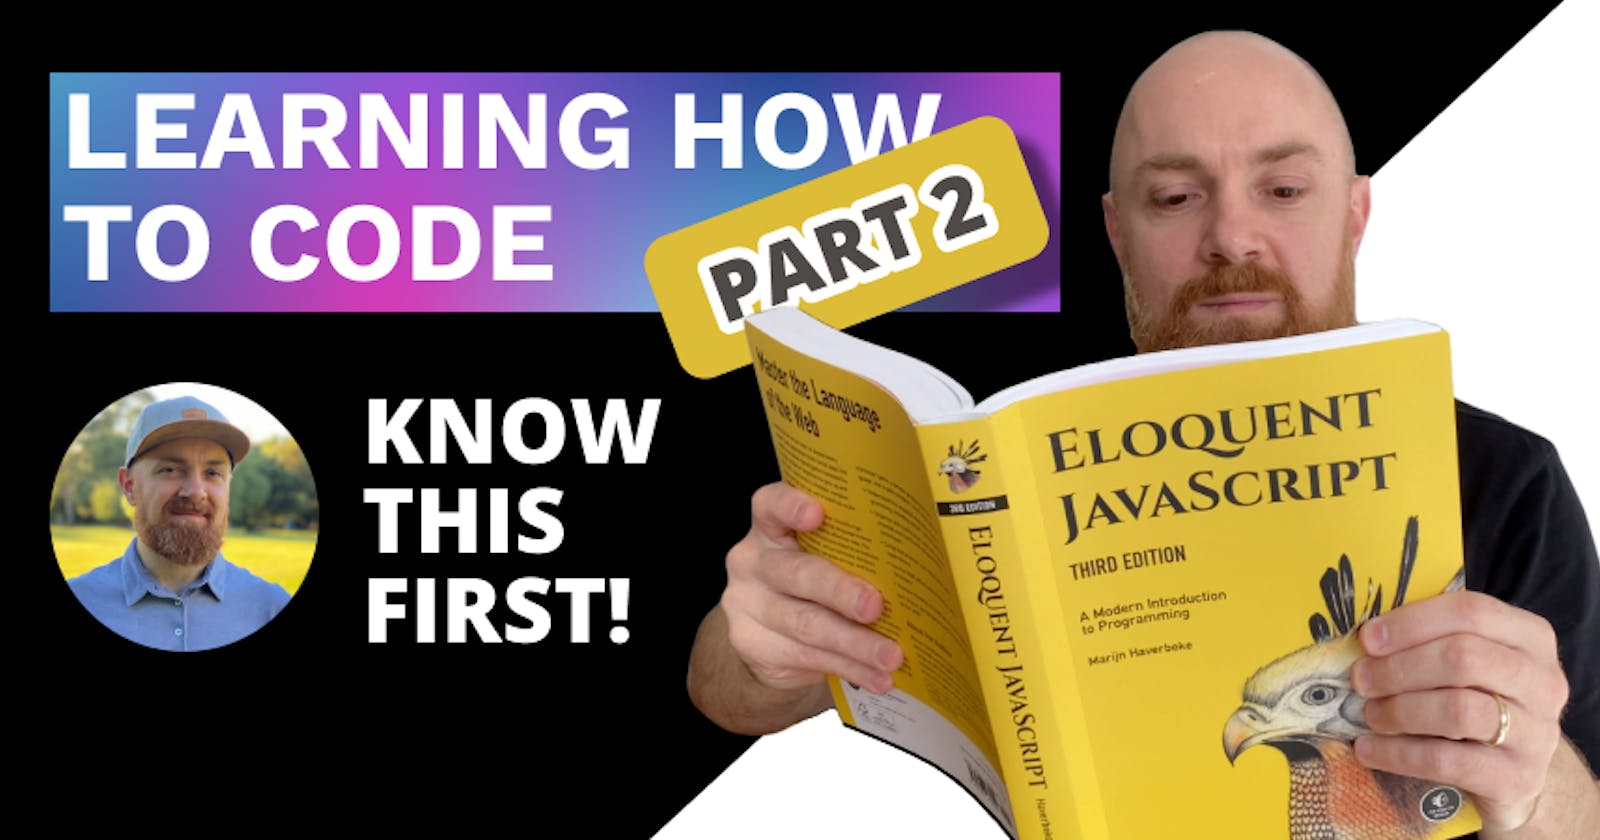 Learning how to code: what you should know first (part 2)